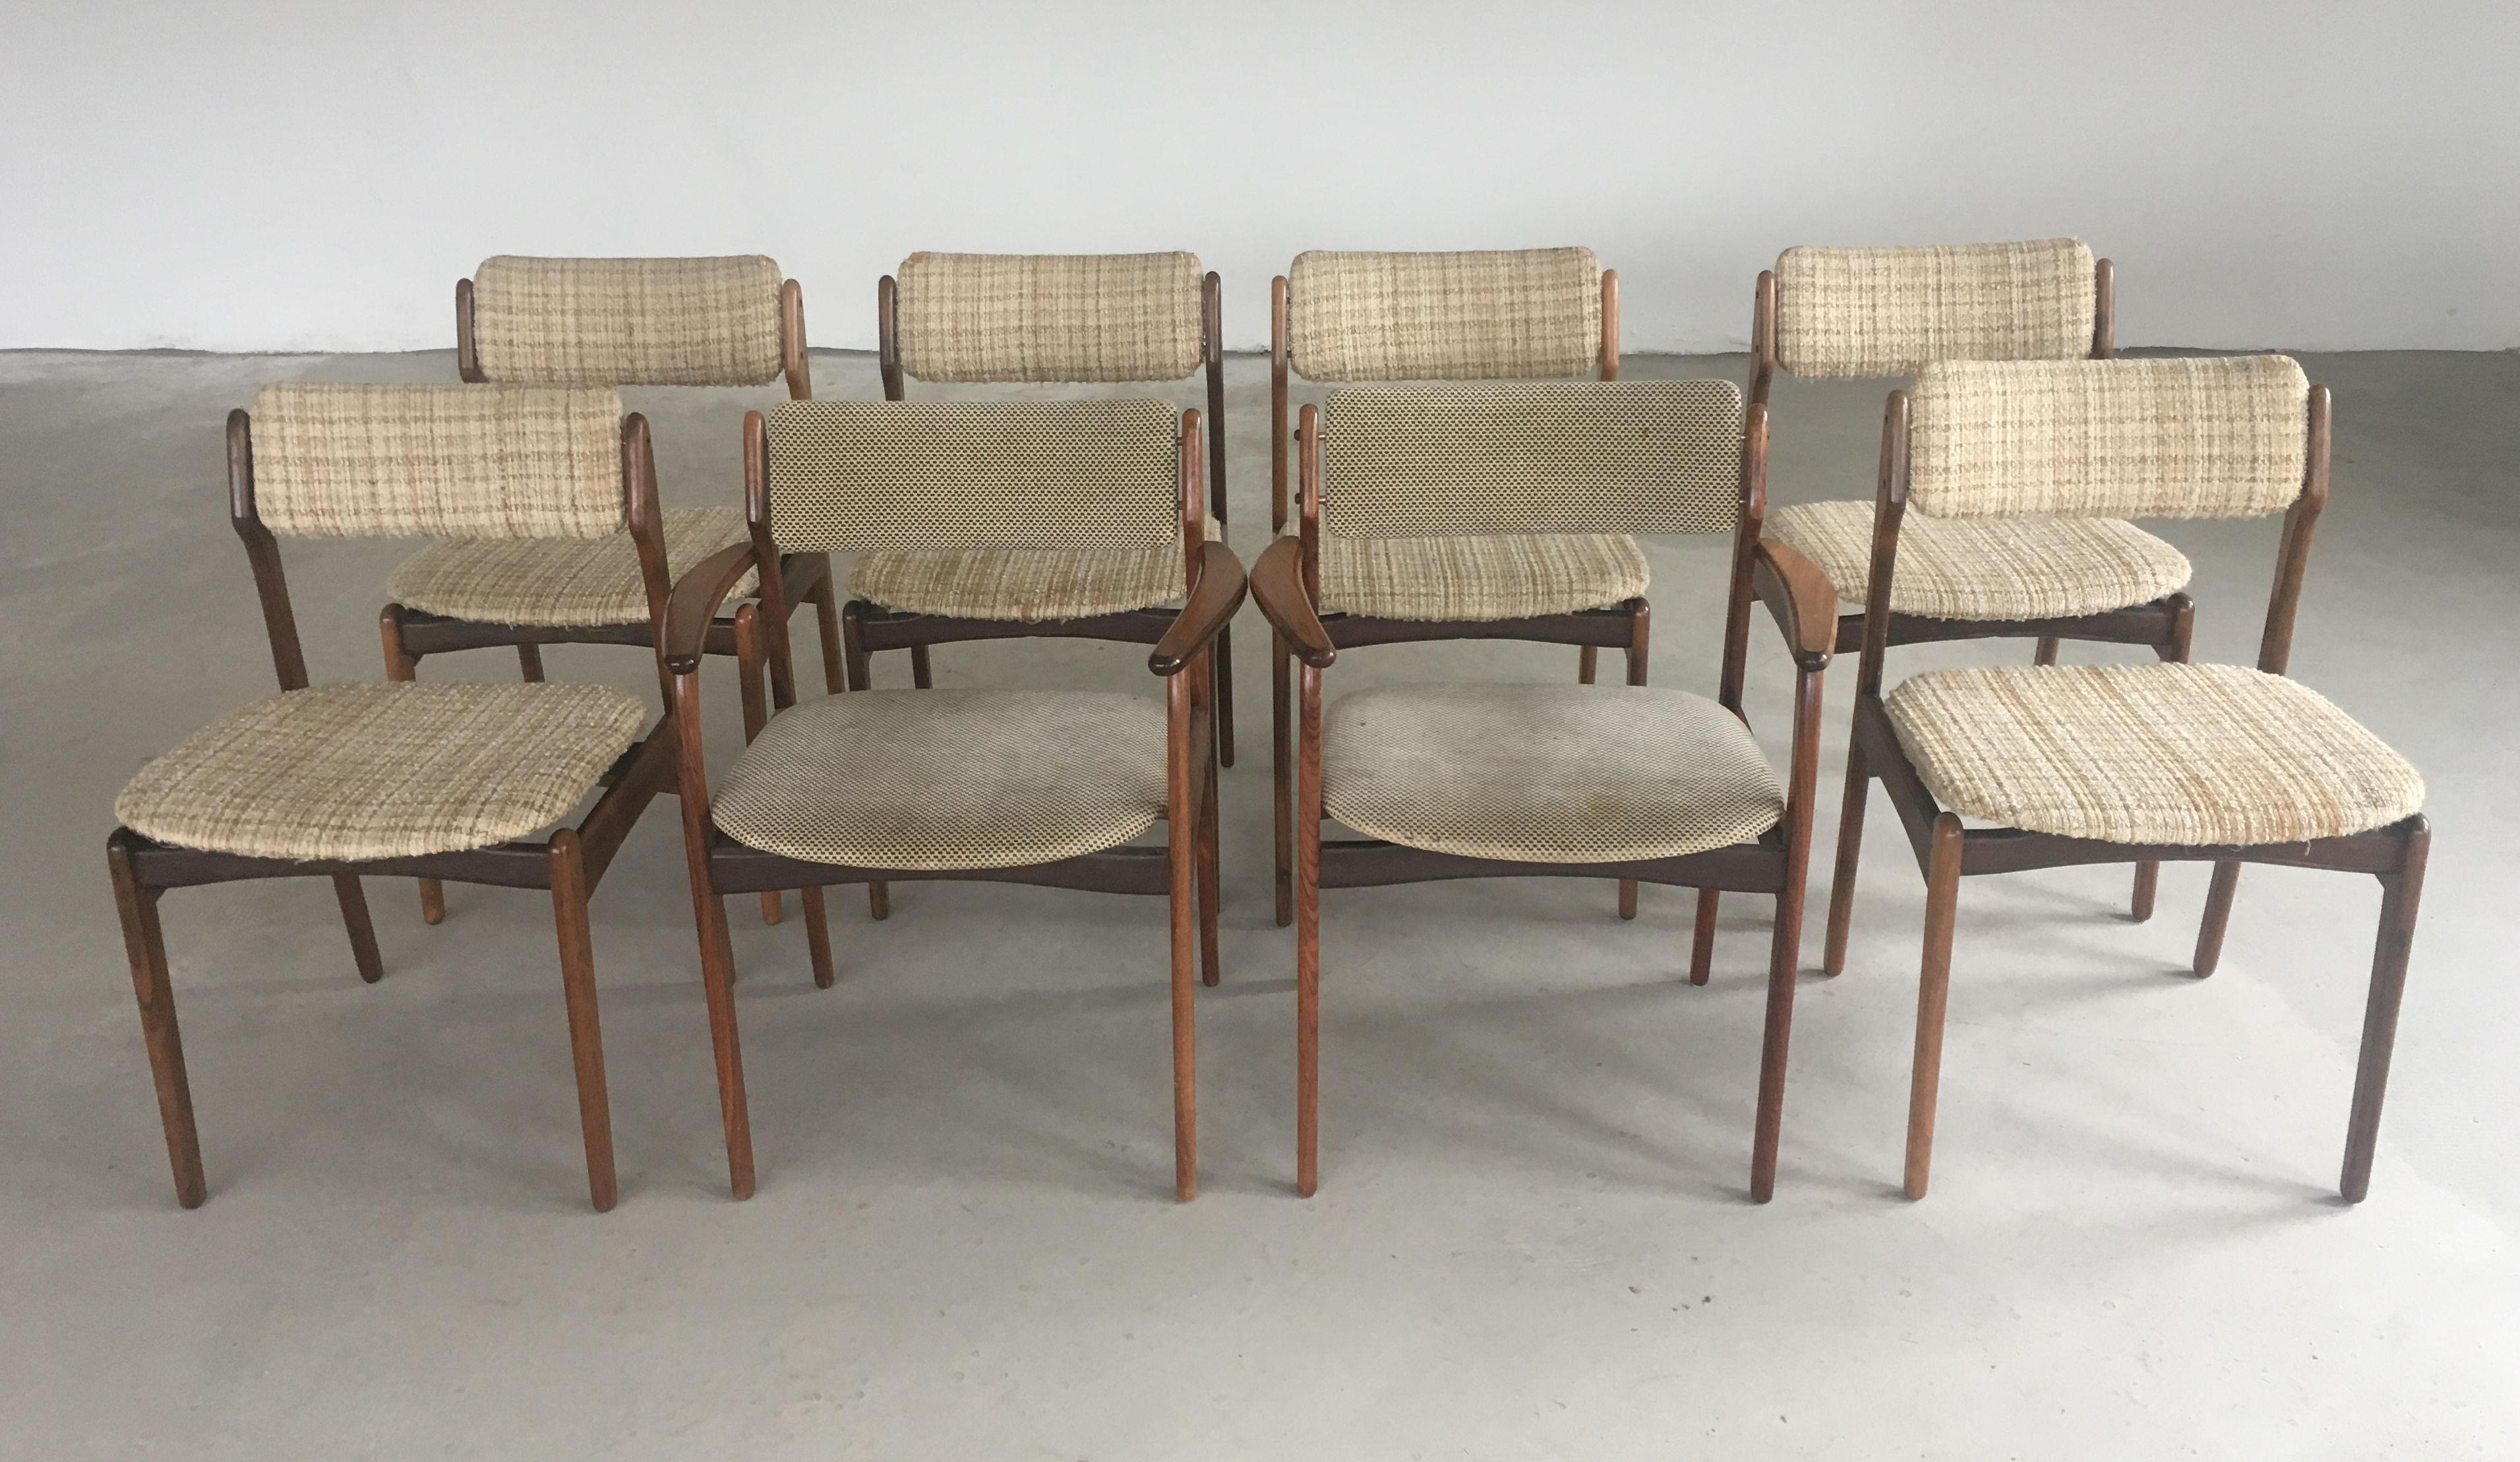 Rare set of eight exclusive Erik Buch rosewood dining chairs from the 1960s consisting of 6 dining chairs and two armchairs.

The chairs feature a development of Erik Buchs well designed model 49 dining chair and model 50 armchair with their elegant